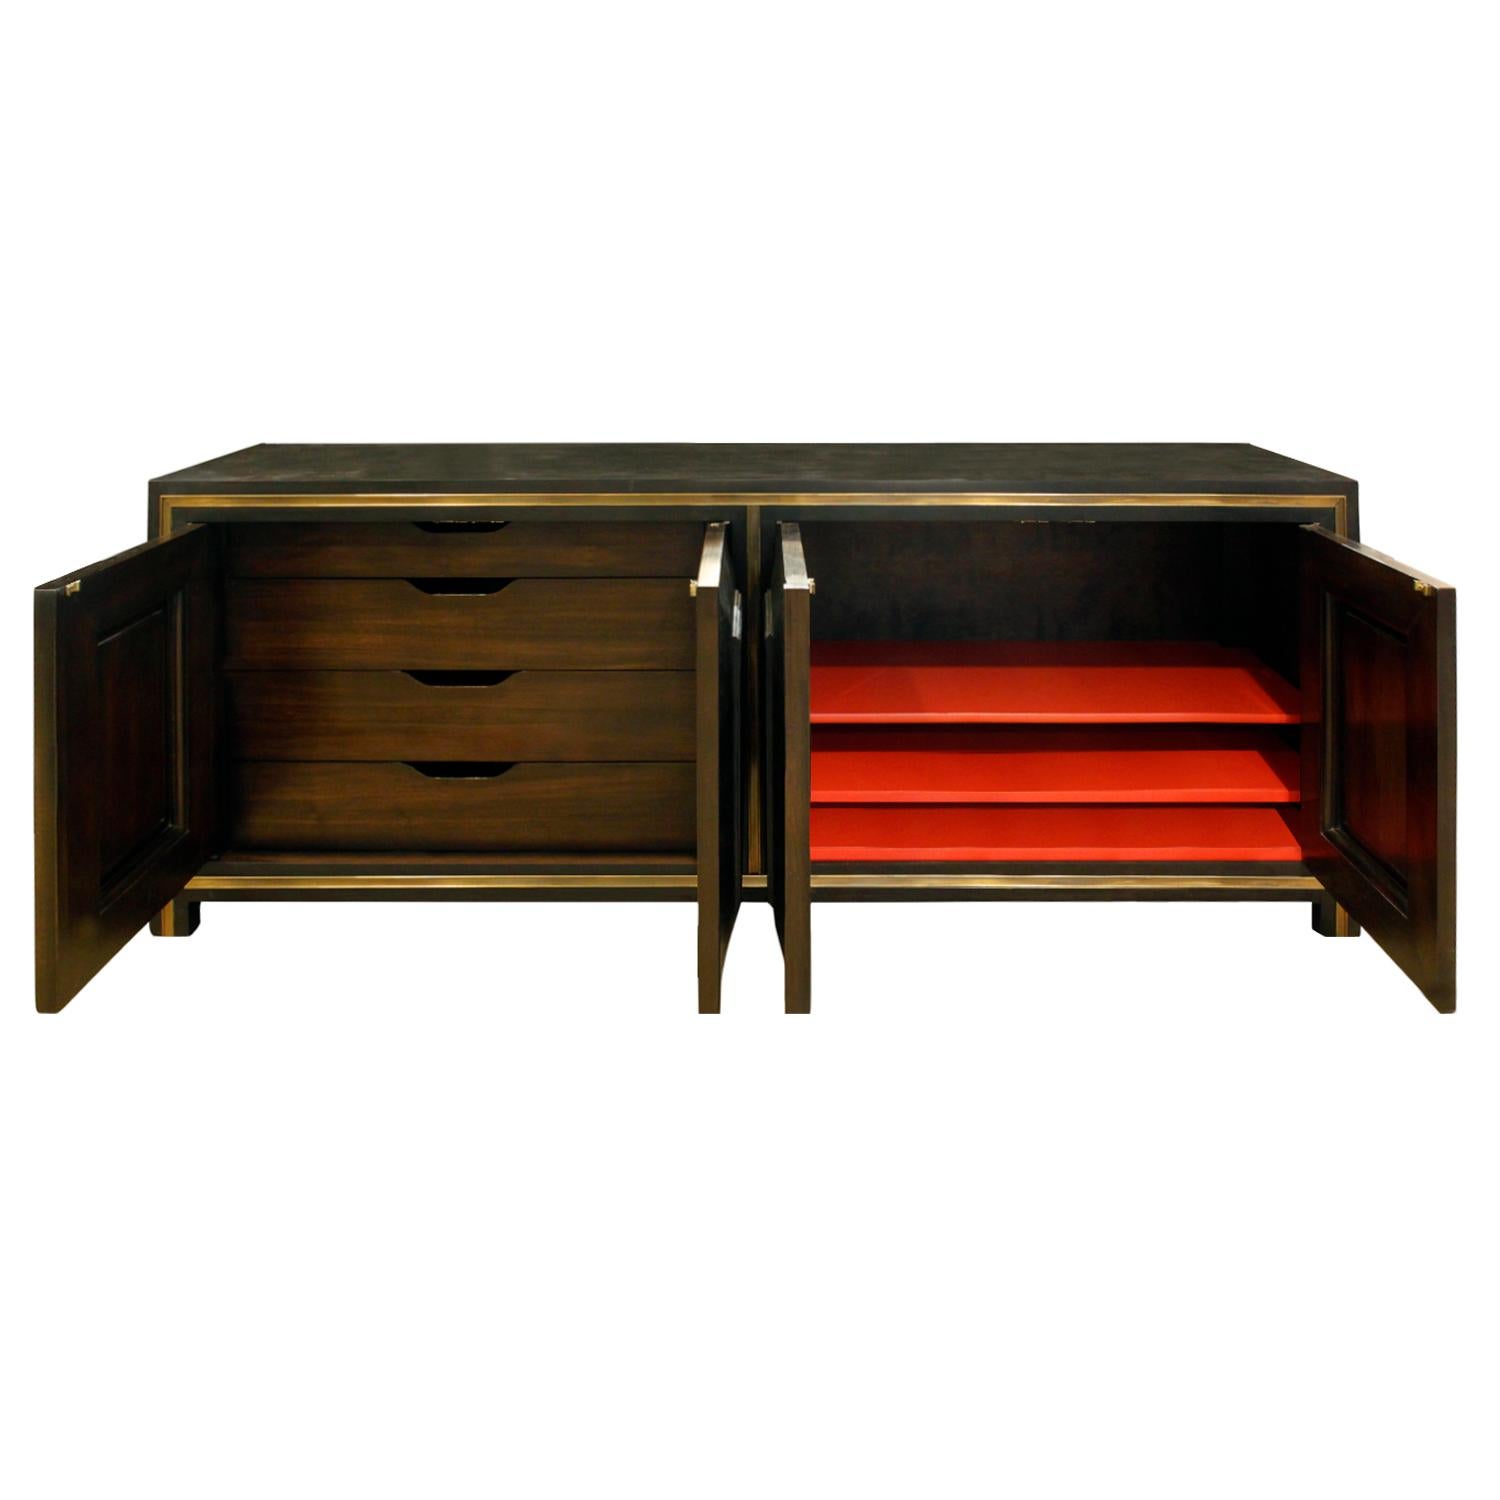 American Mastercraft Chic Credenza in Dark Carpathian Elm and with Brass, 1960s